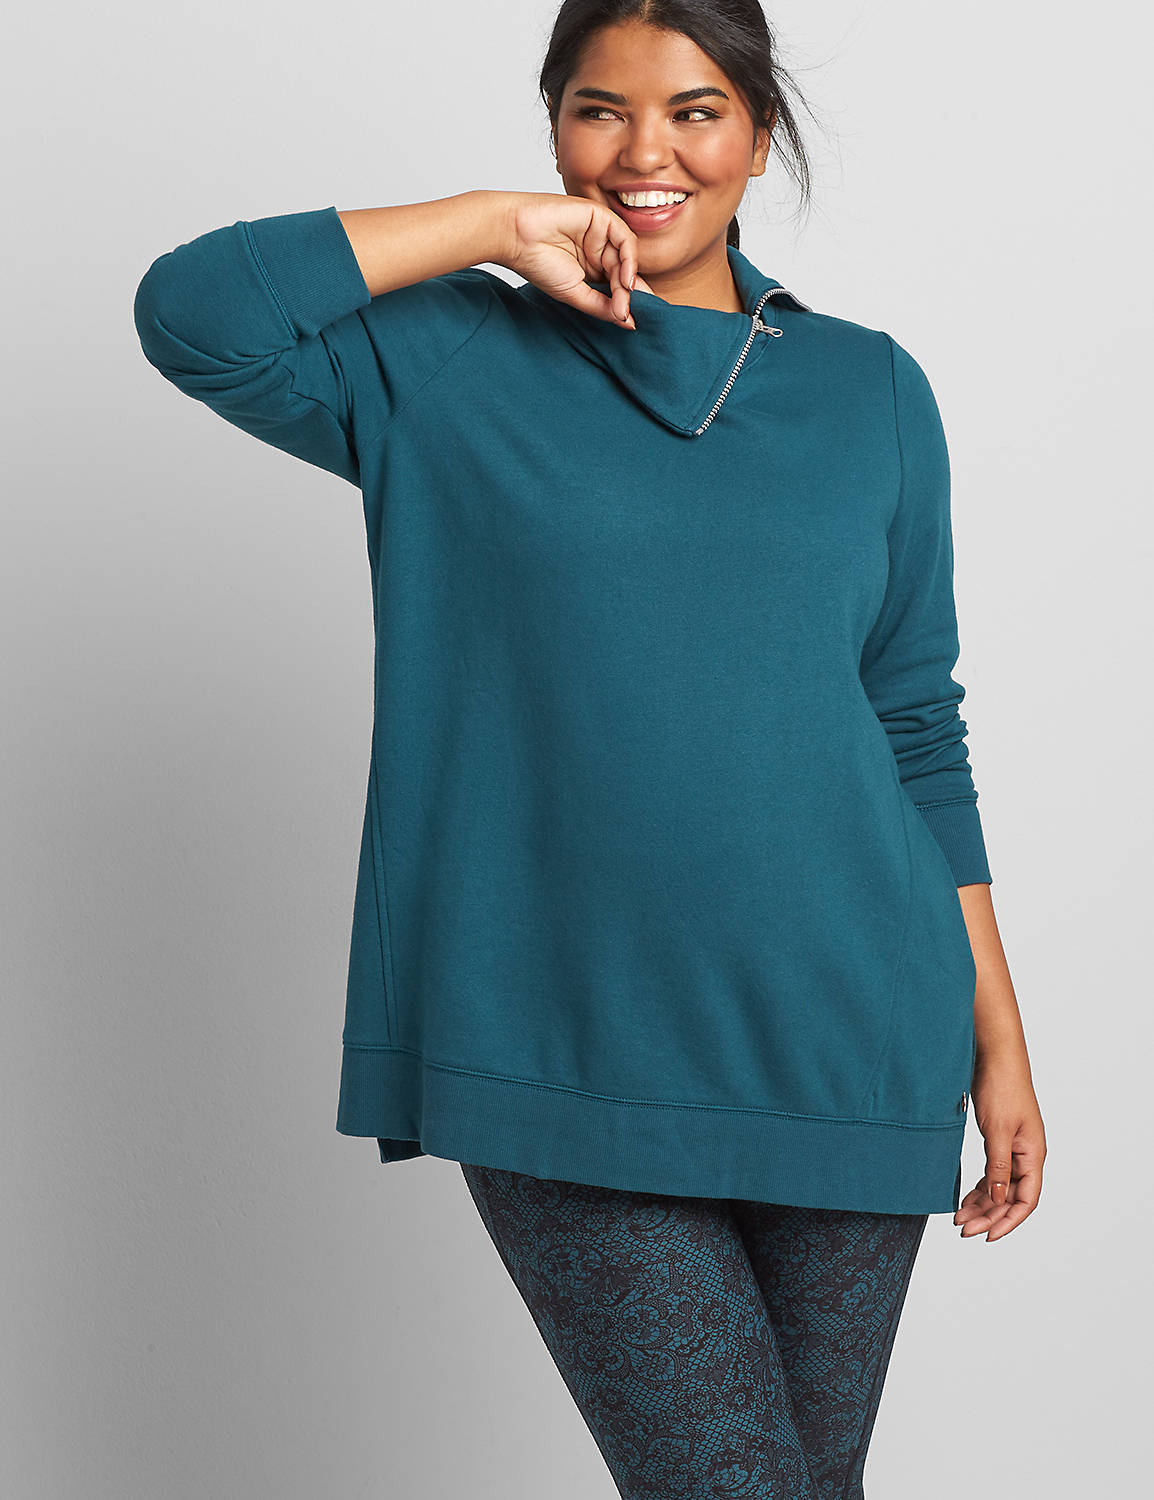 LongSleeve Split Neck French Terry Product Image 1